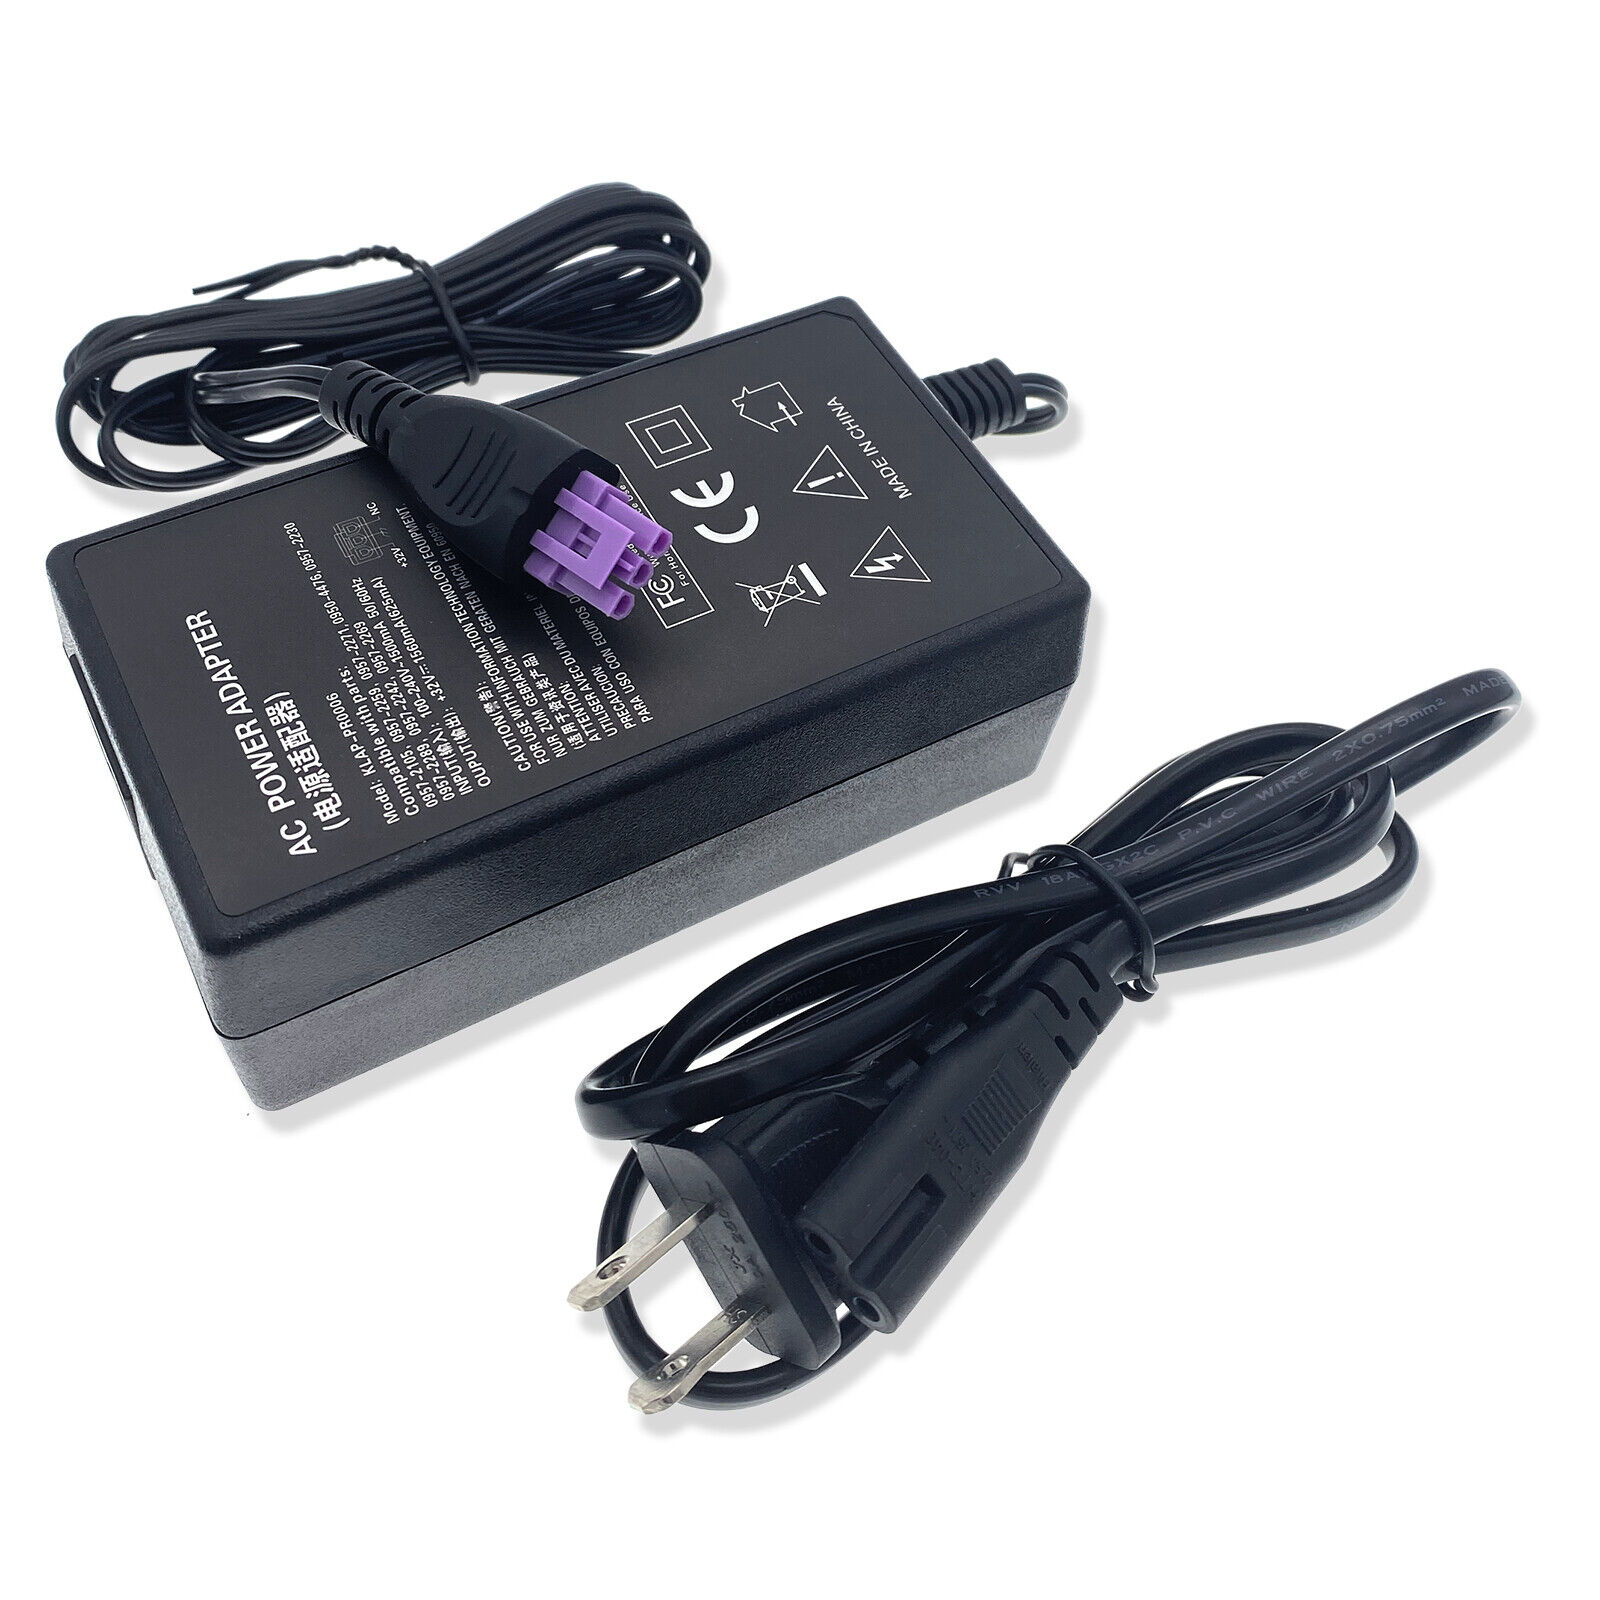 32V AC Adapter For HP PHOTOSMART D110A, D110B All-in-One AIO Printer Power Cord